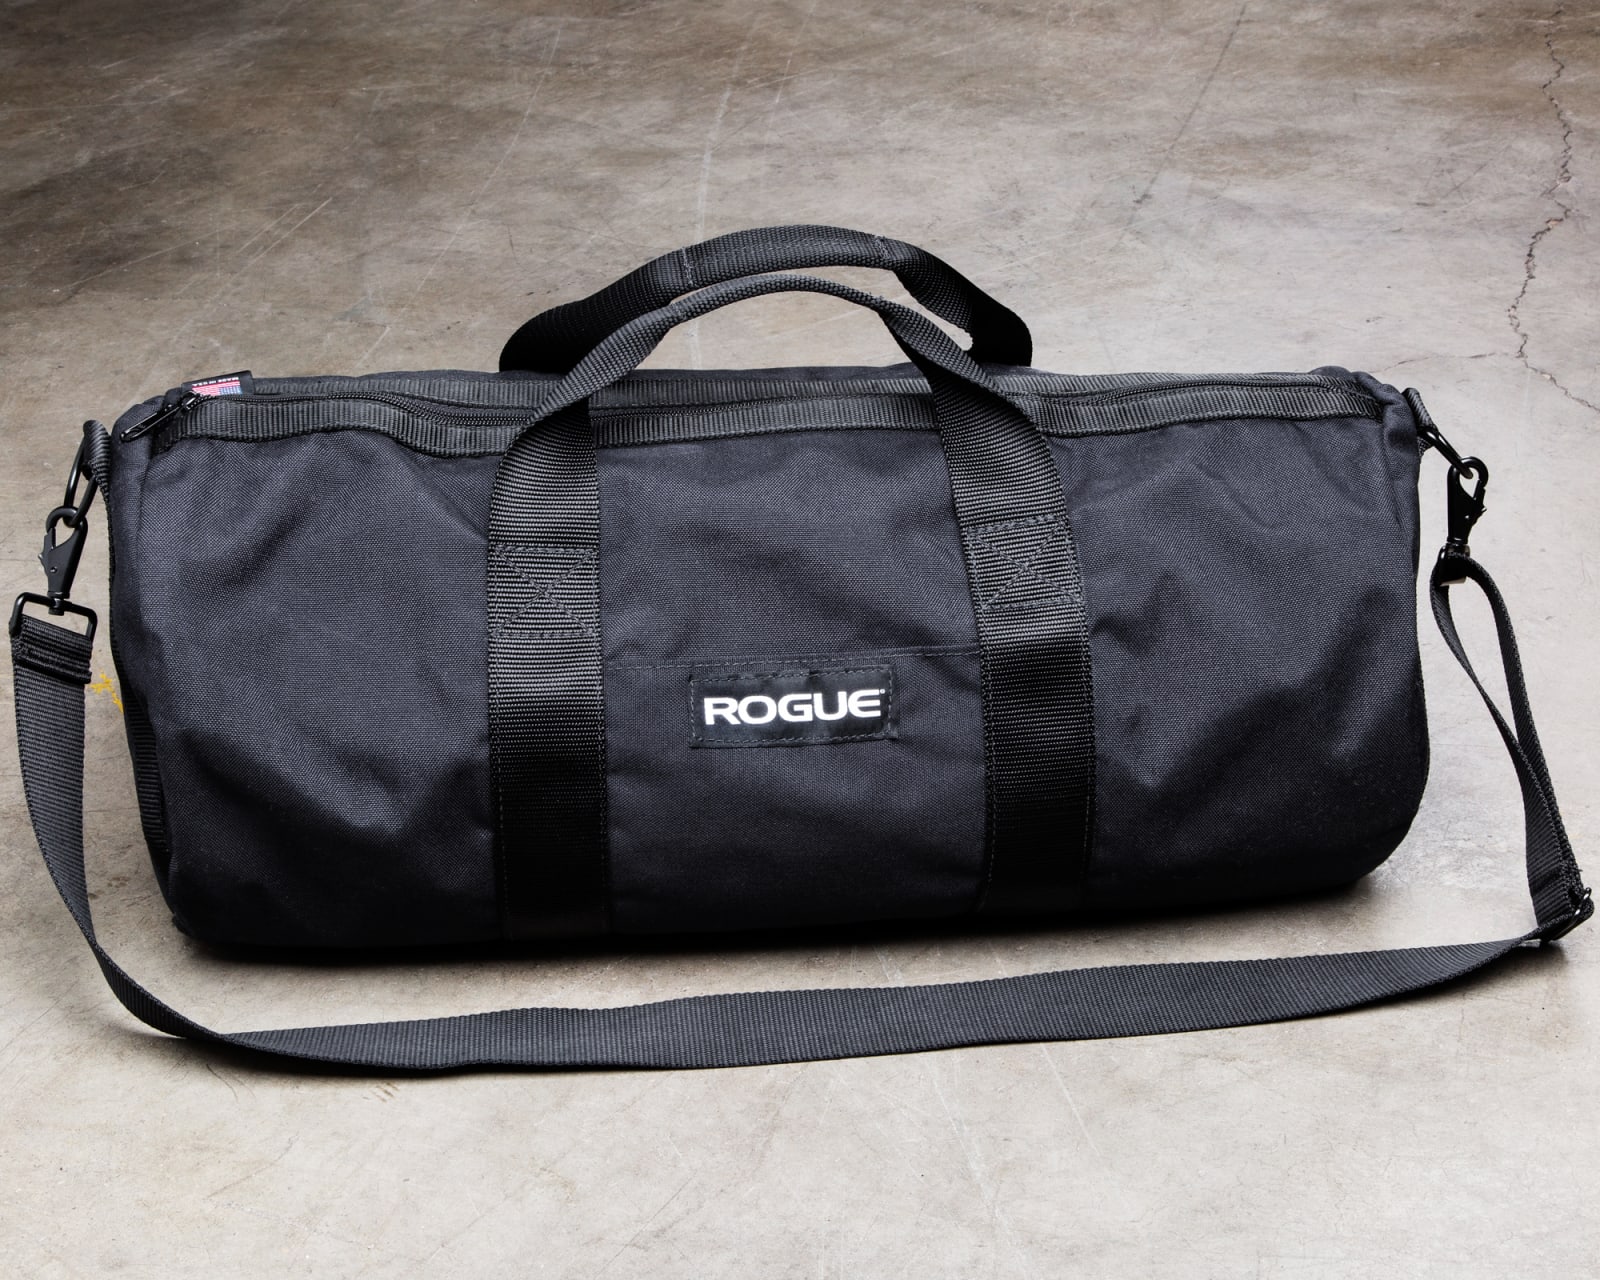 Go Rogue with Coach Bags - Shopping and Info